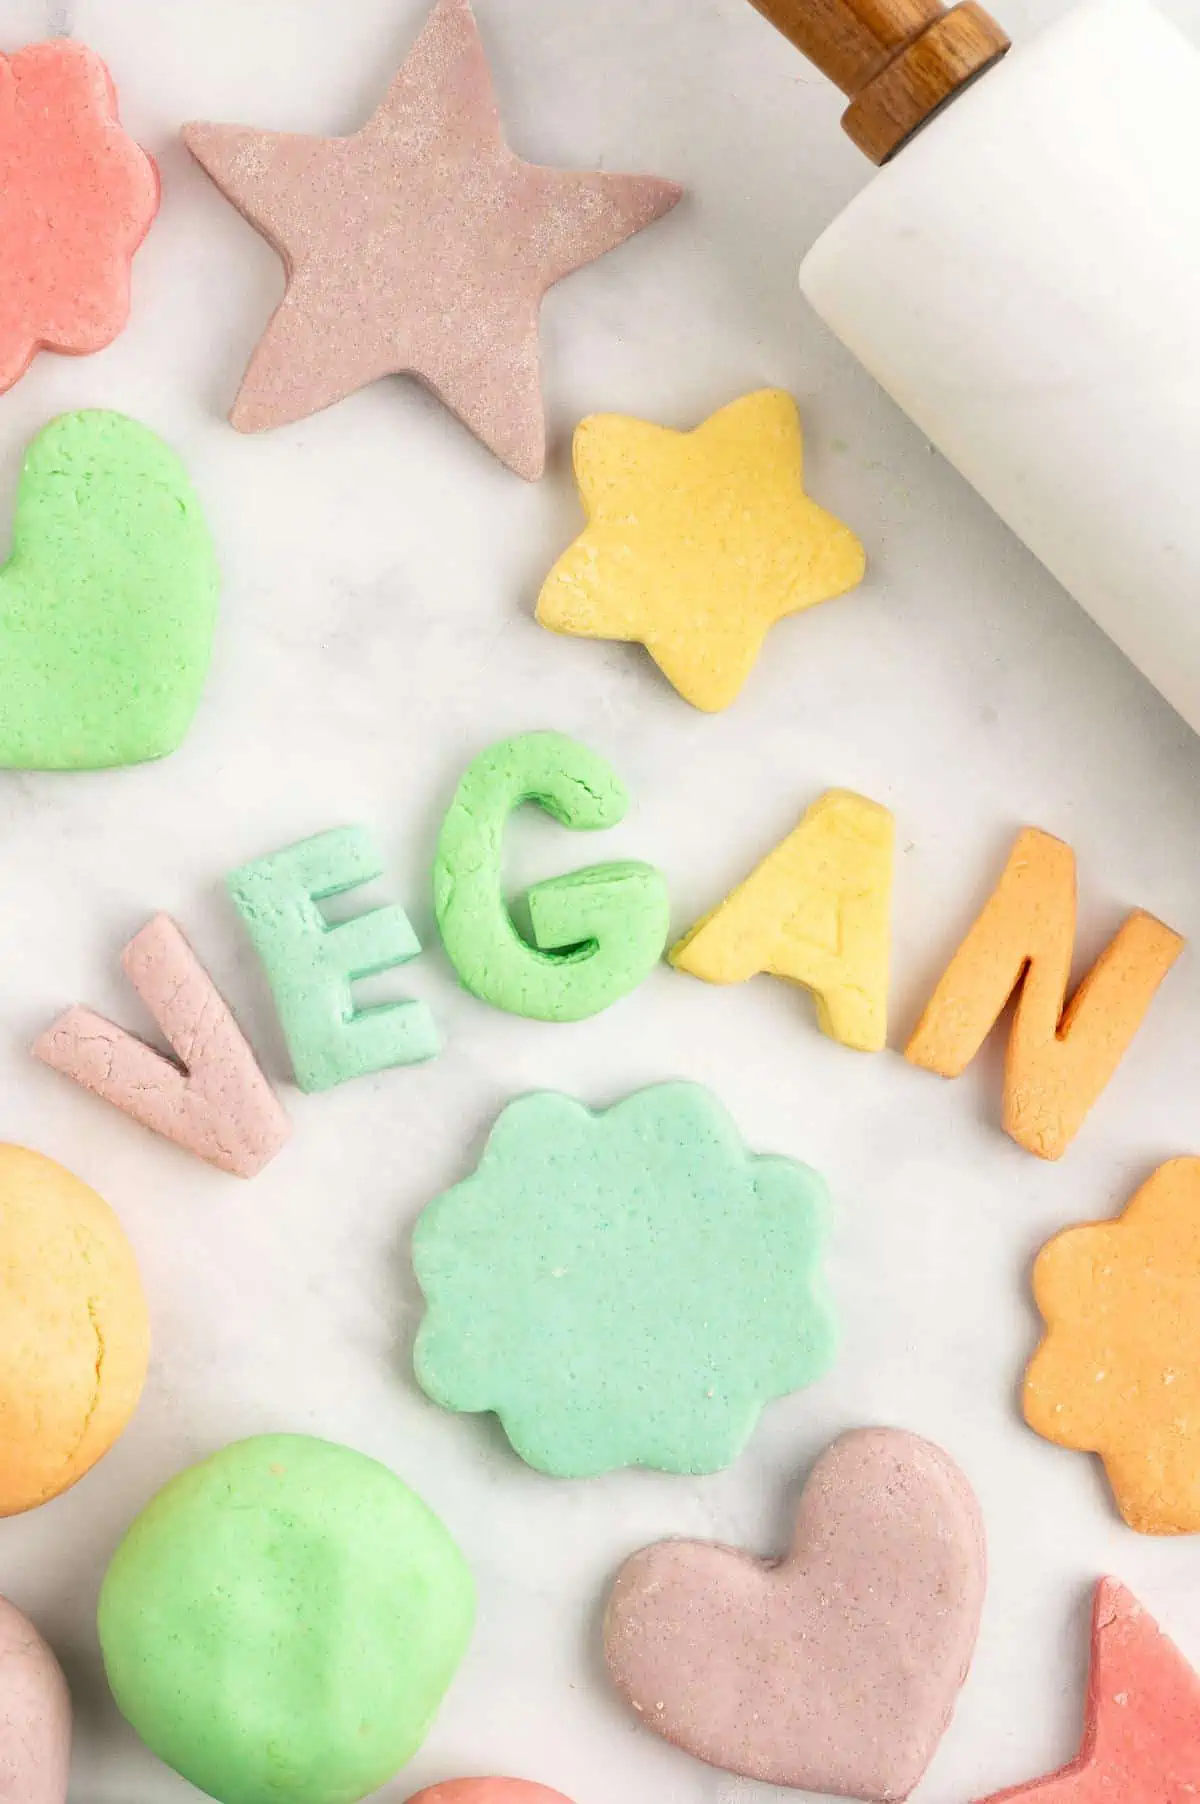 Play dough in different rainbow color, that have been shaped to spell out "vegan" with other stars, hearts and shapes around it.